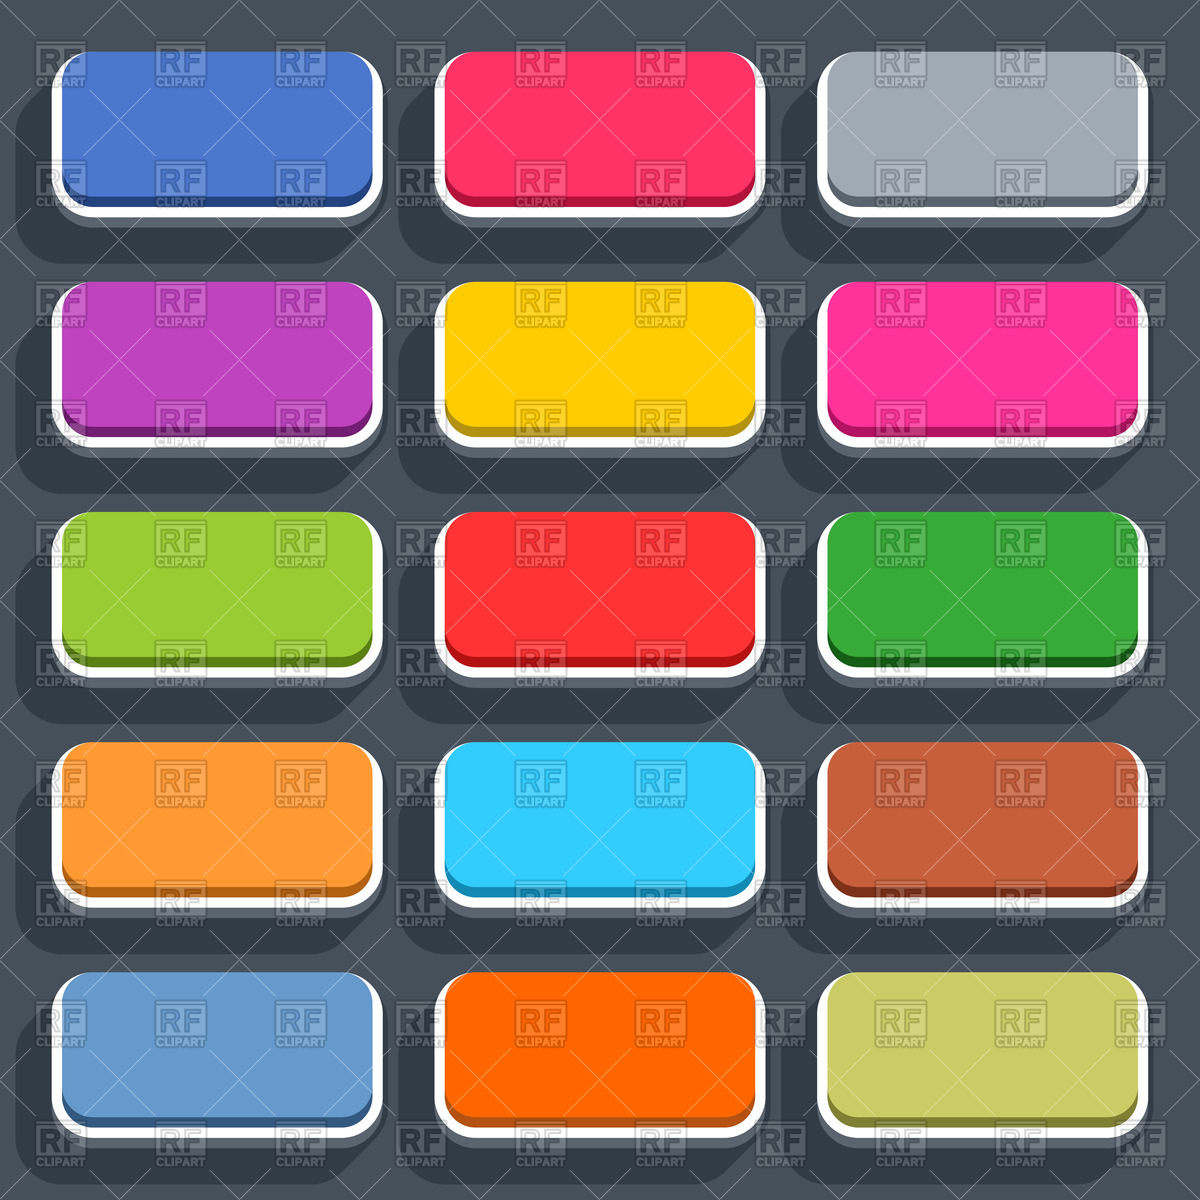 Rectangle Flat Style 3d Buttons With Rounded Corners Download Royalty